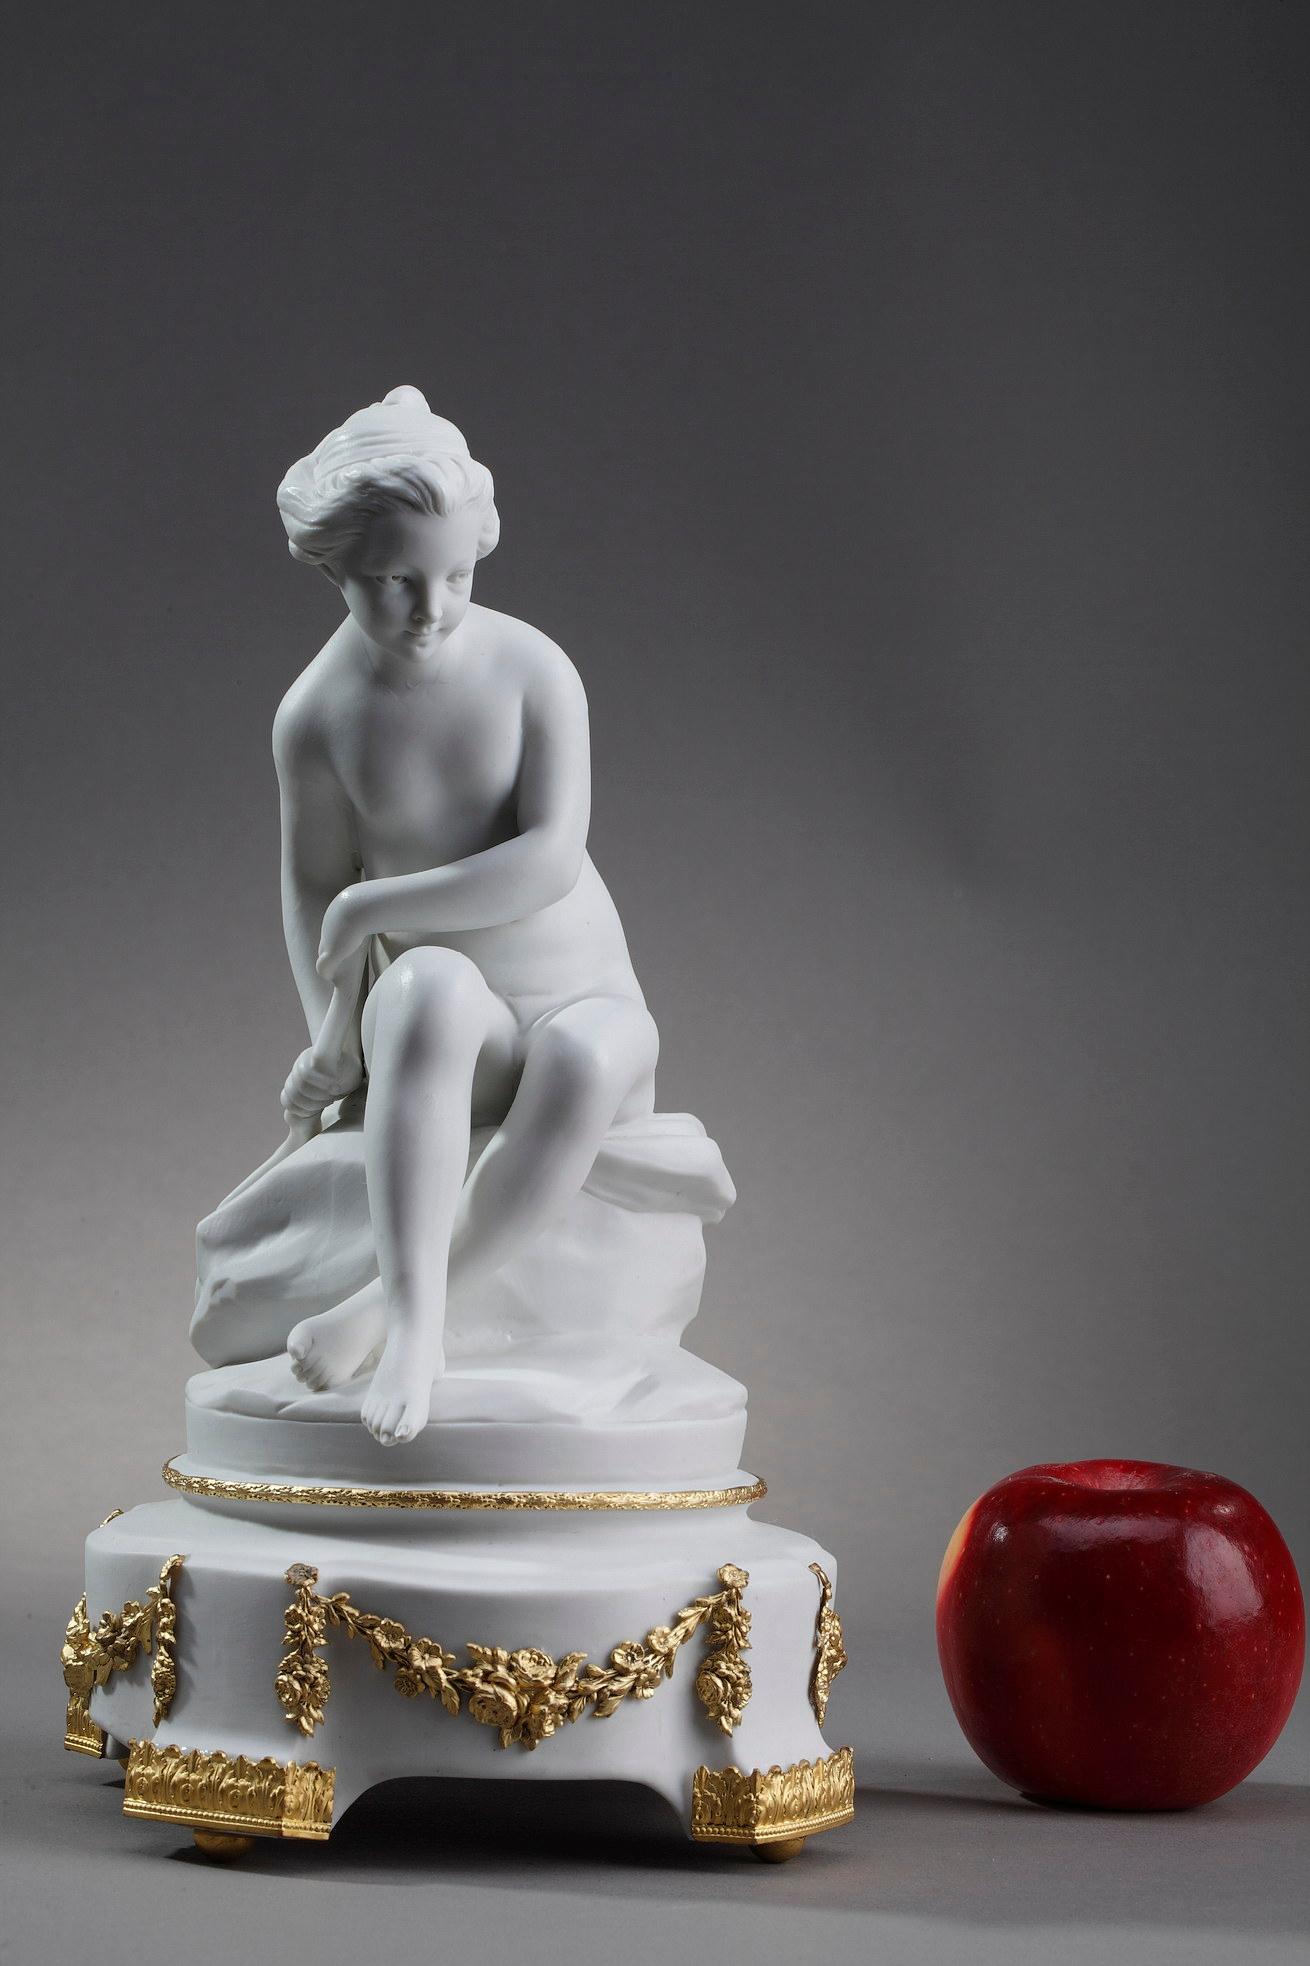 Statuette in bisque porcelain of the Rudolstadt-Volkstedt factory representing Psyche as a small girl hiding the bow of Cupid. Her hair is raised in a bun. The eyes with hollowed out pupils show the ingenuity of Etienne-Maurice Falconnet to give